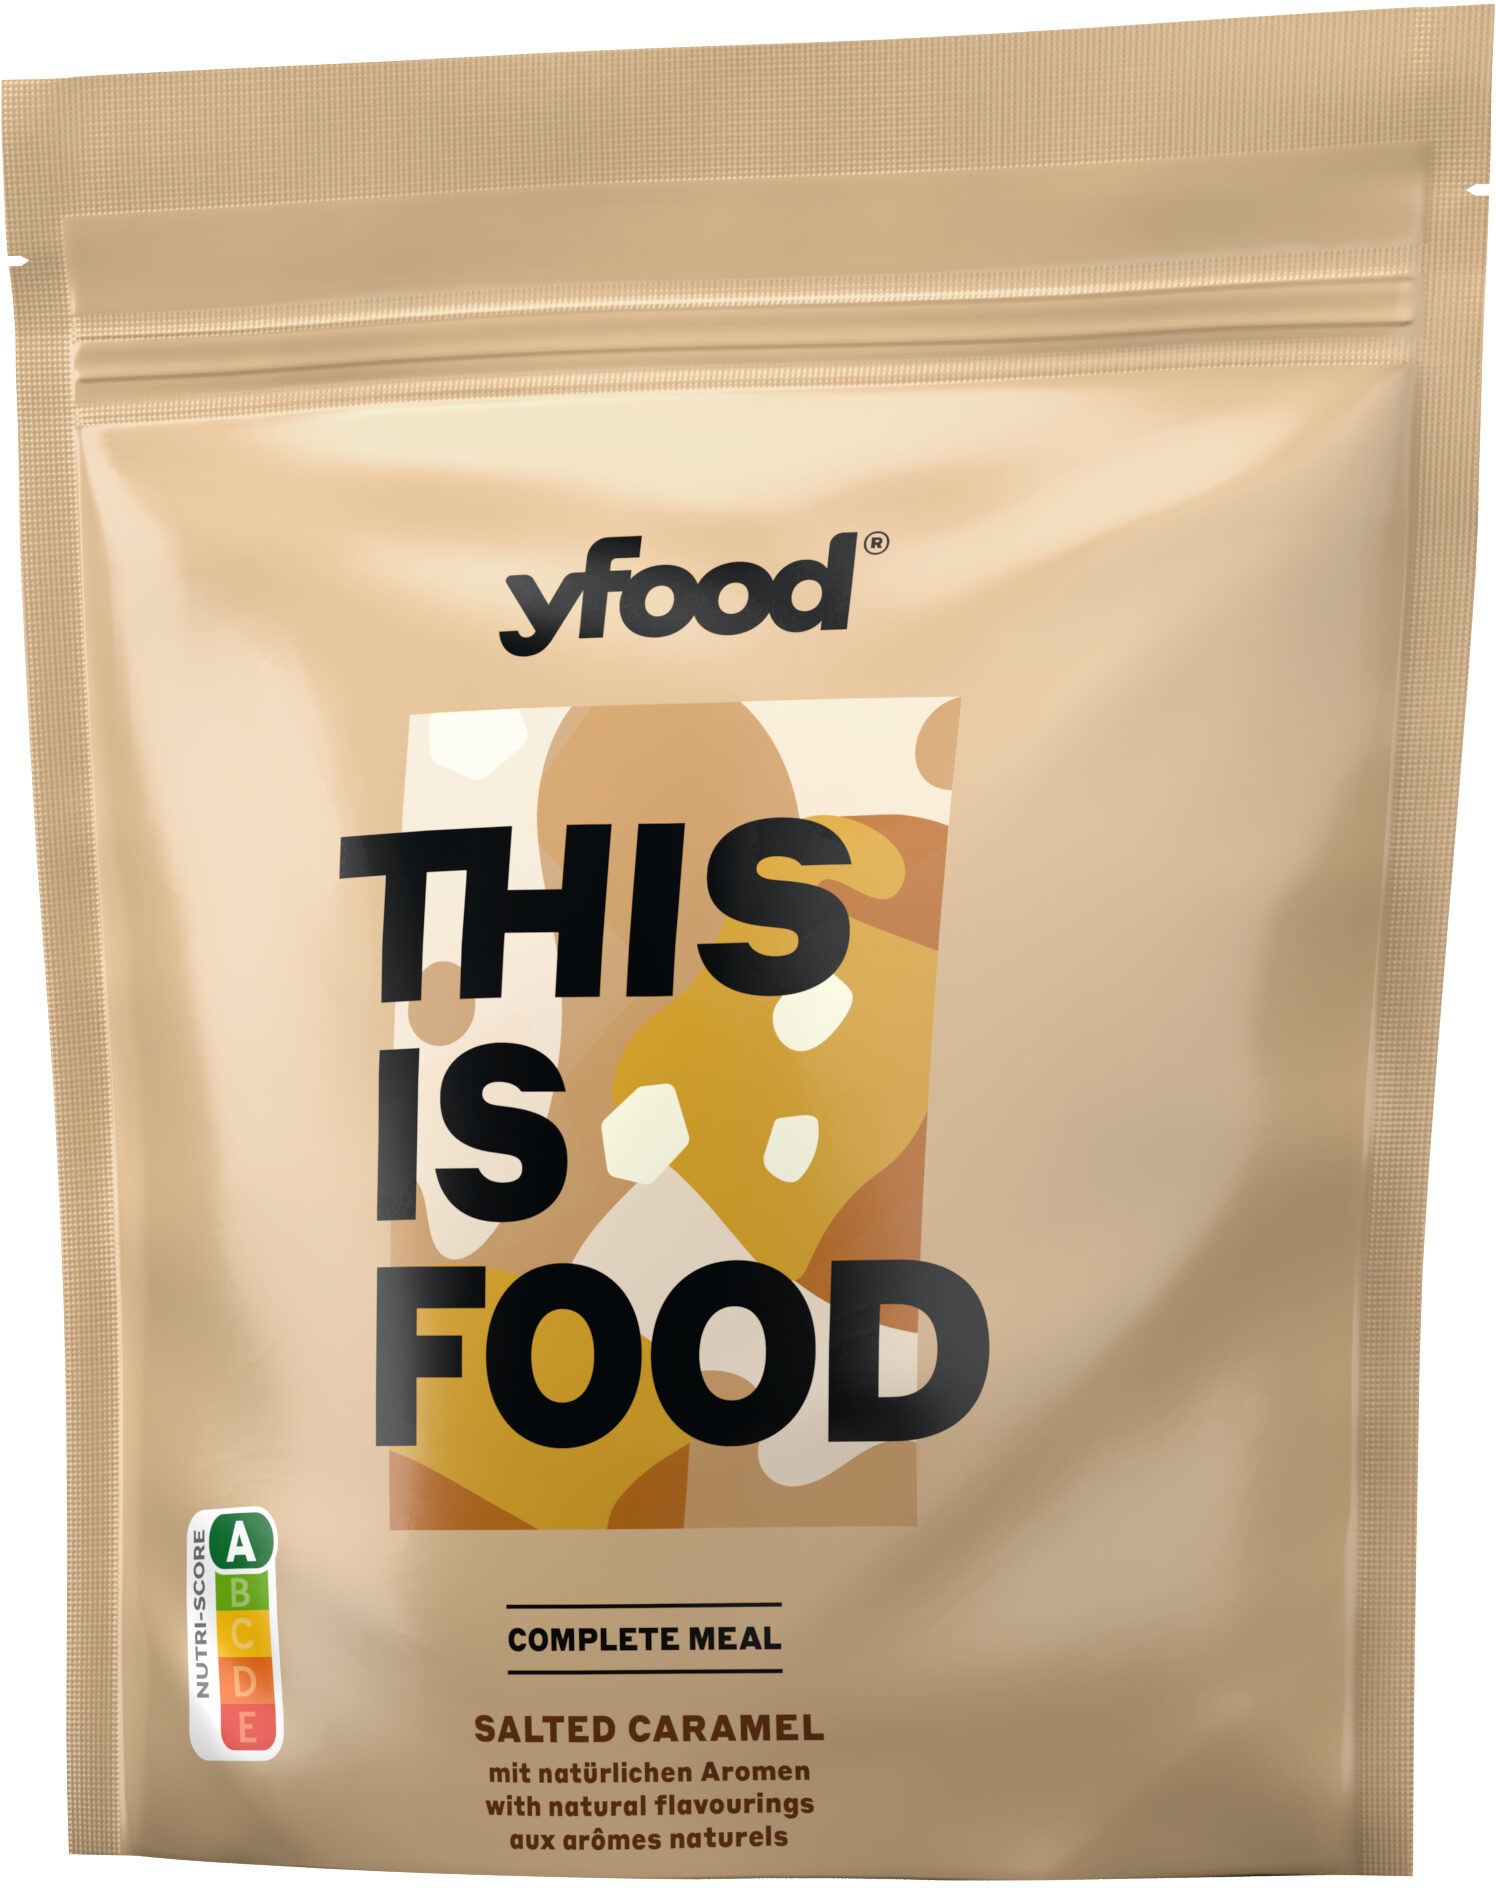 yfood Classic Pulver Salted Caramel - Instruction de recyclage et/ou informations d'emballage - fr